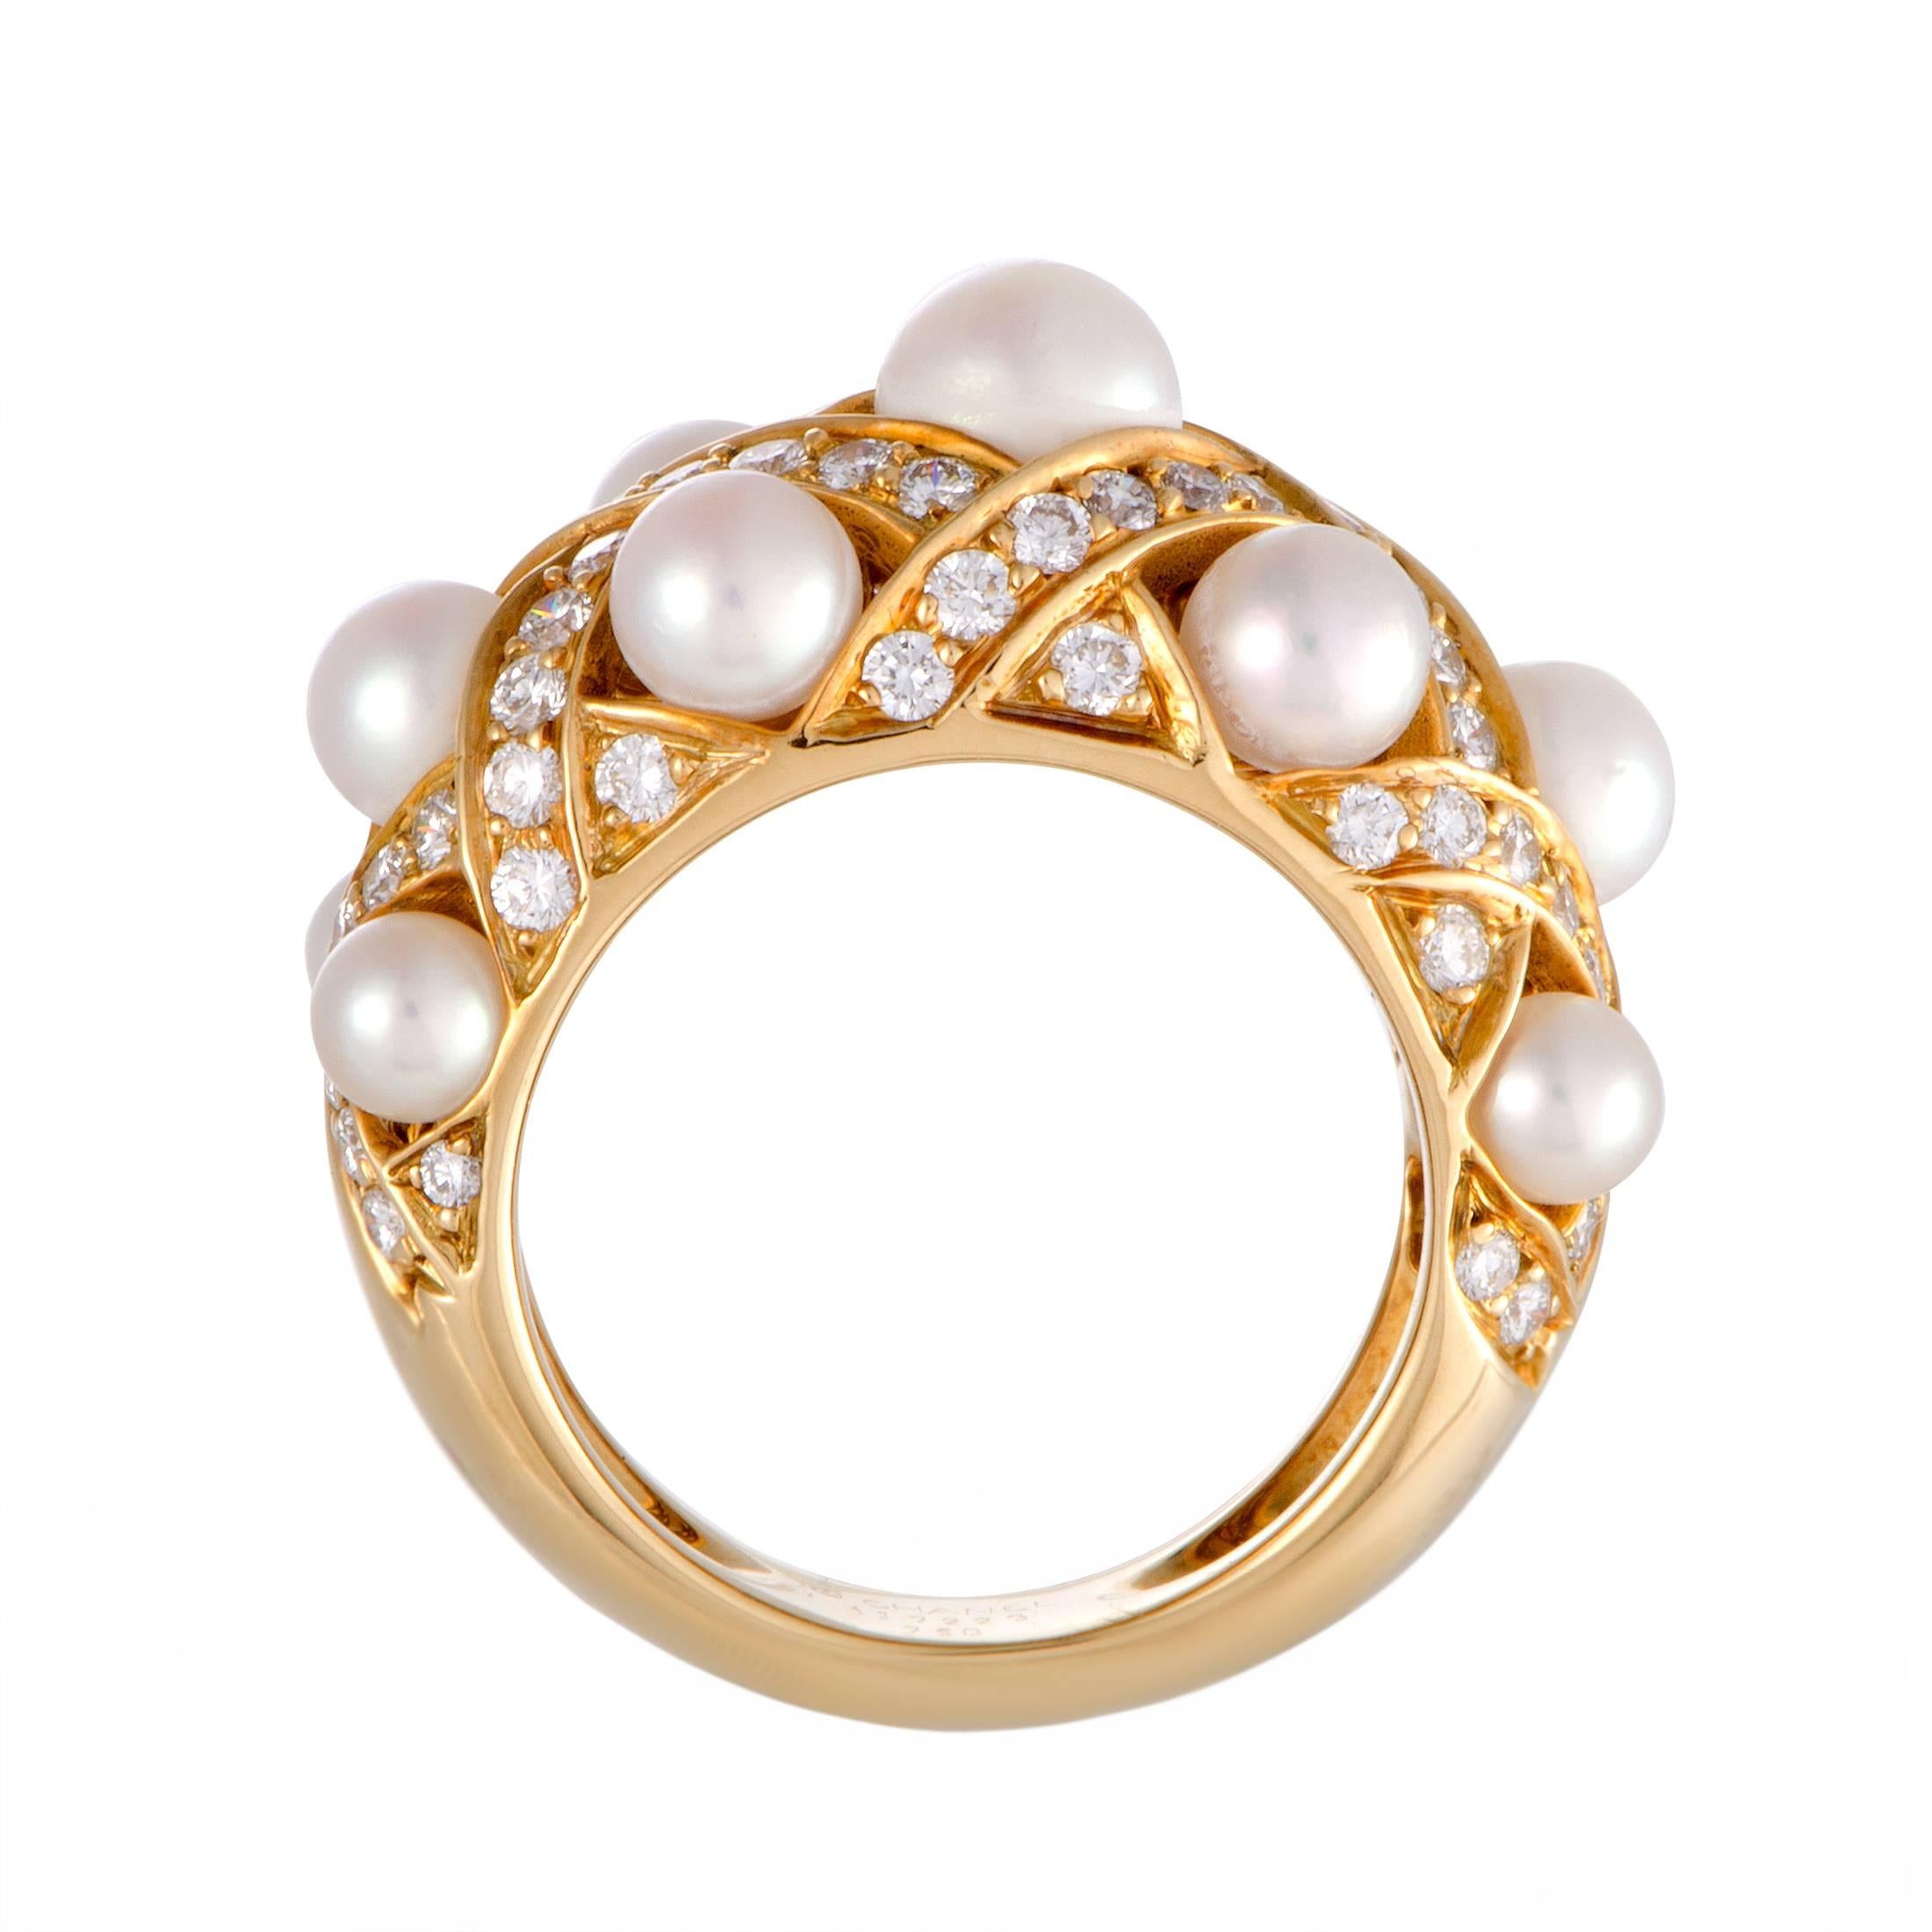 Elegance and opulence are entwined in this majestic 18K yellow gold ring that features a spellbindingly intricate design and luxurious décor. Presented by Chanel within the “Matelassé” fine jewelry collection, the ring is embellished with sublime